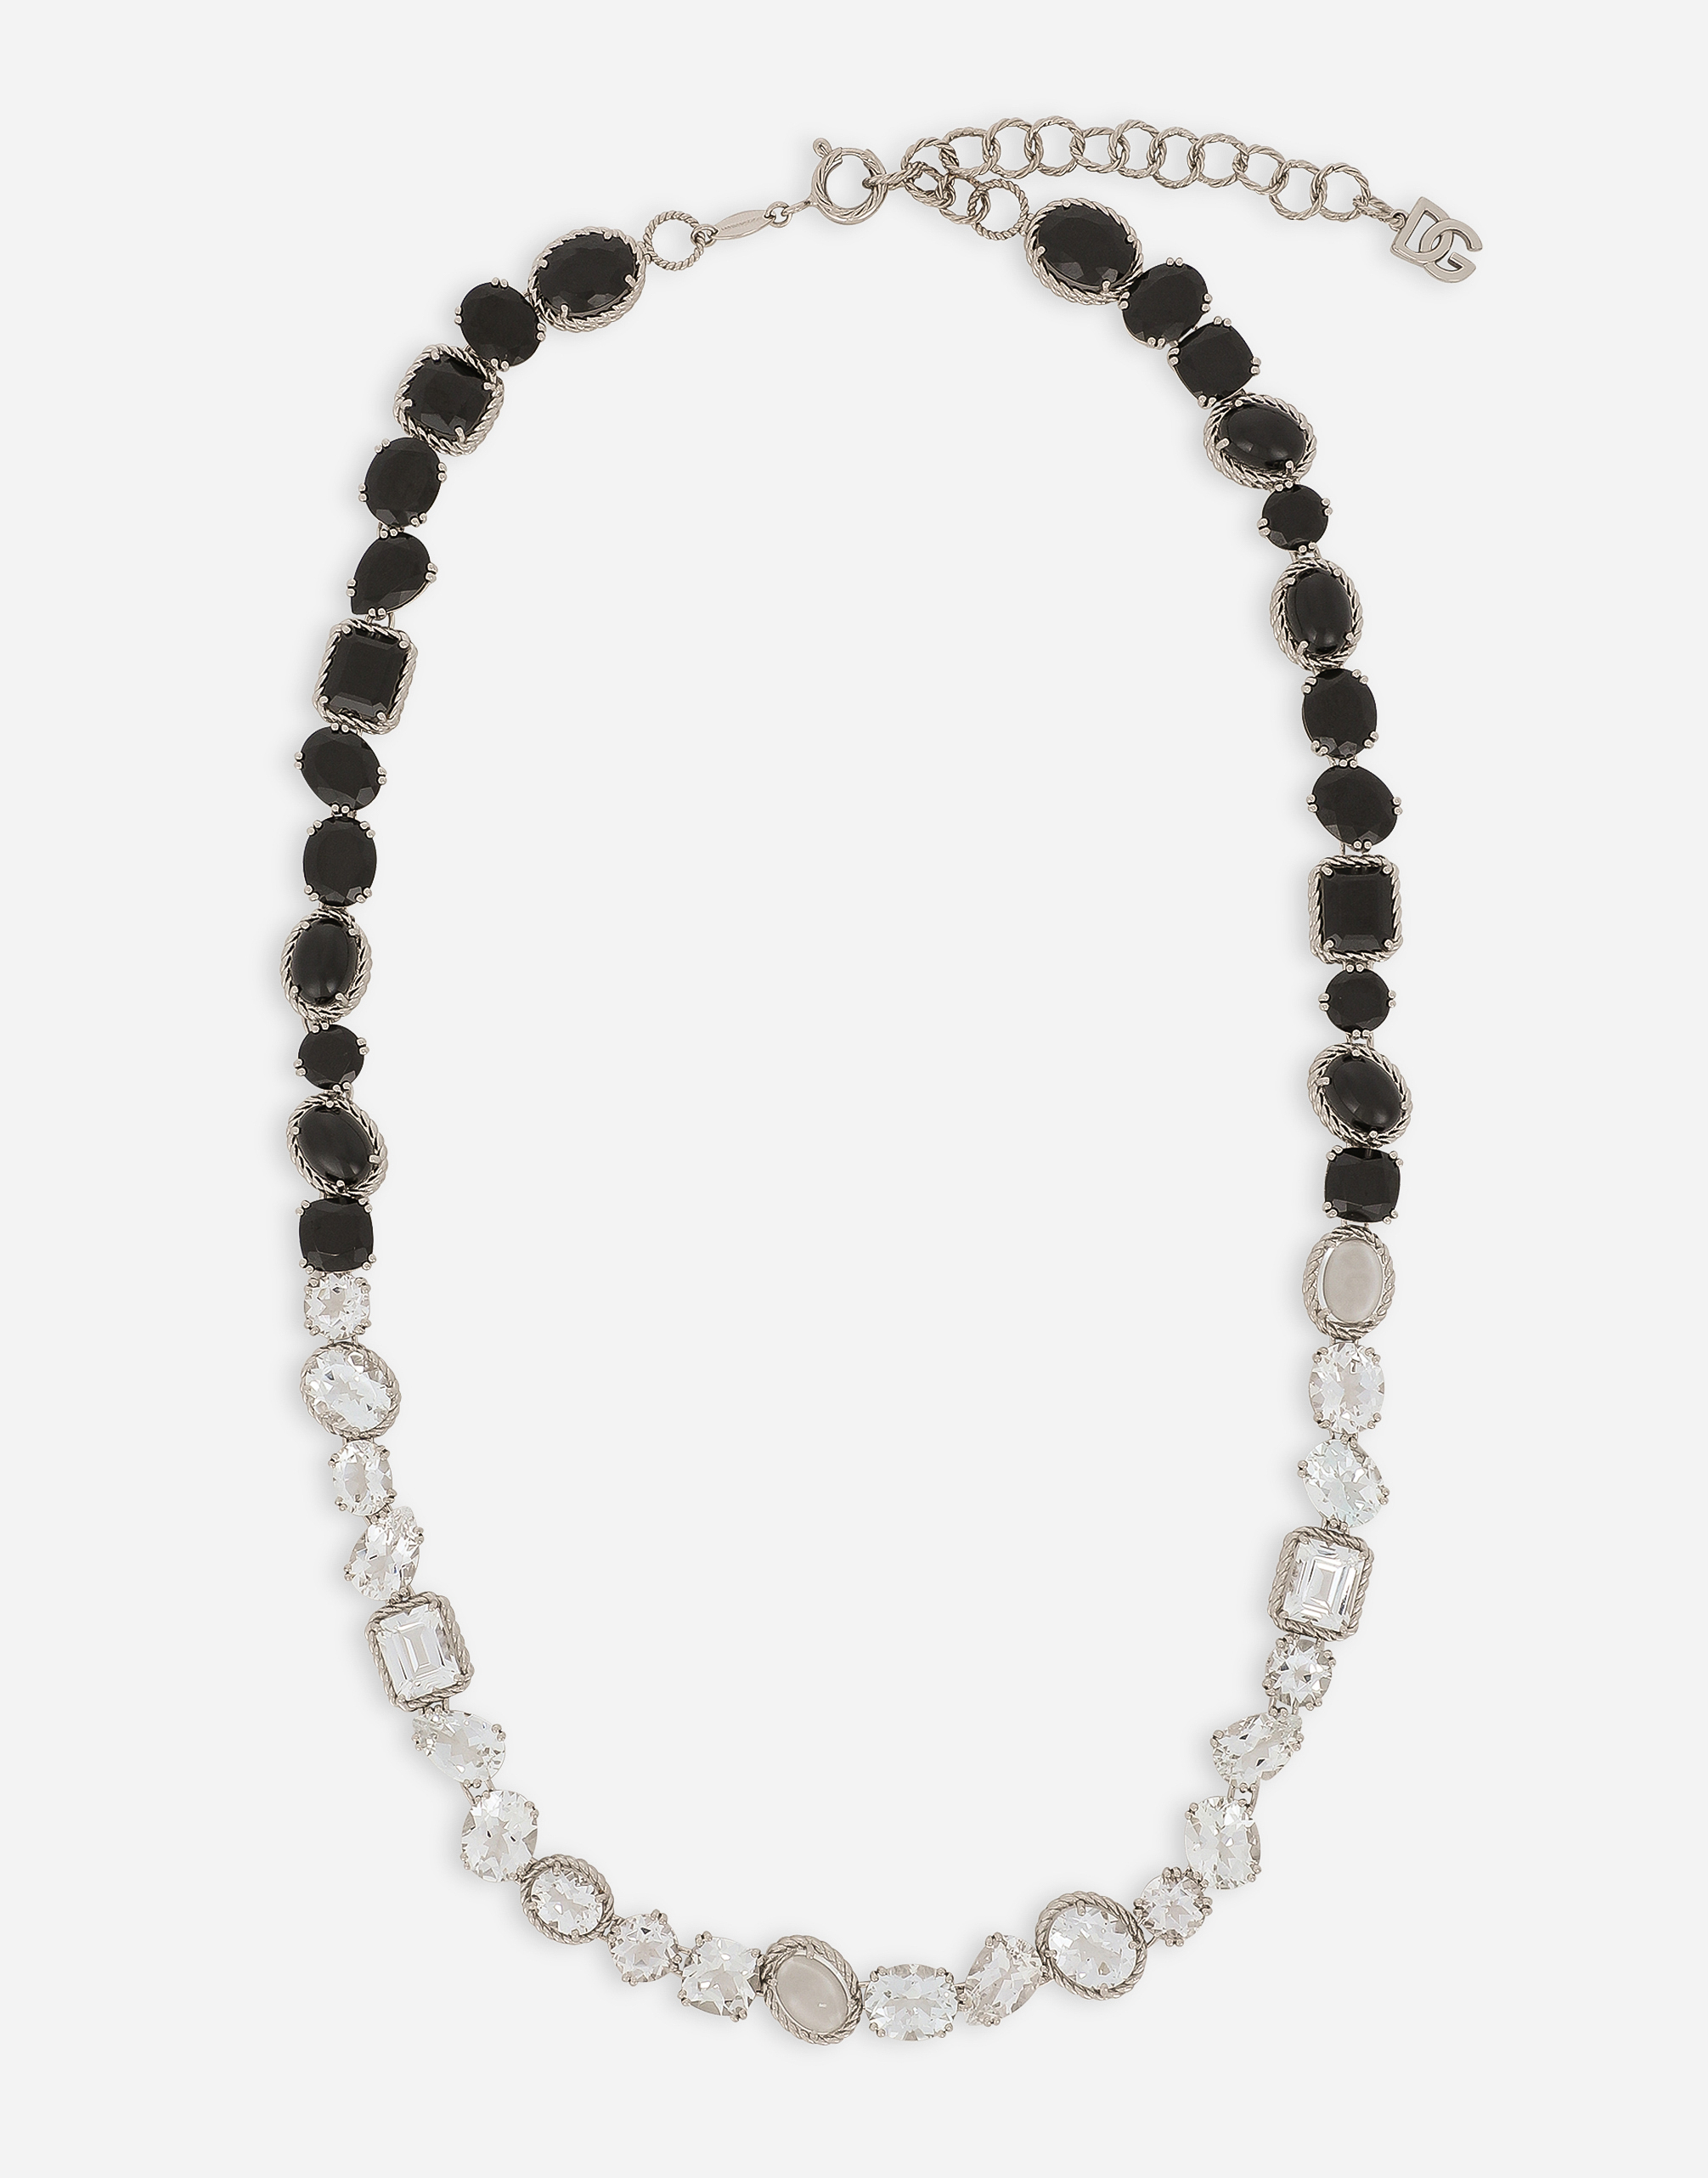 Dolce & Gabbana Anna Necklace In White Gold 18kt With Spinels And Topazes In Multi